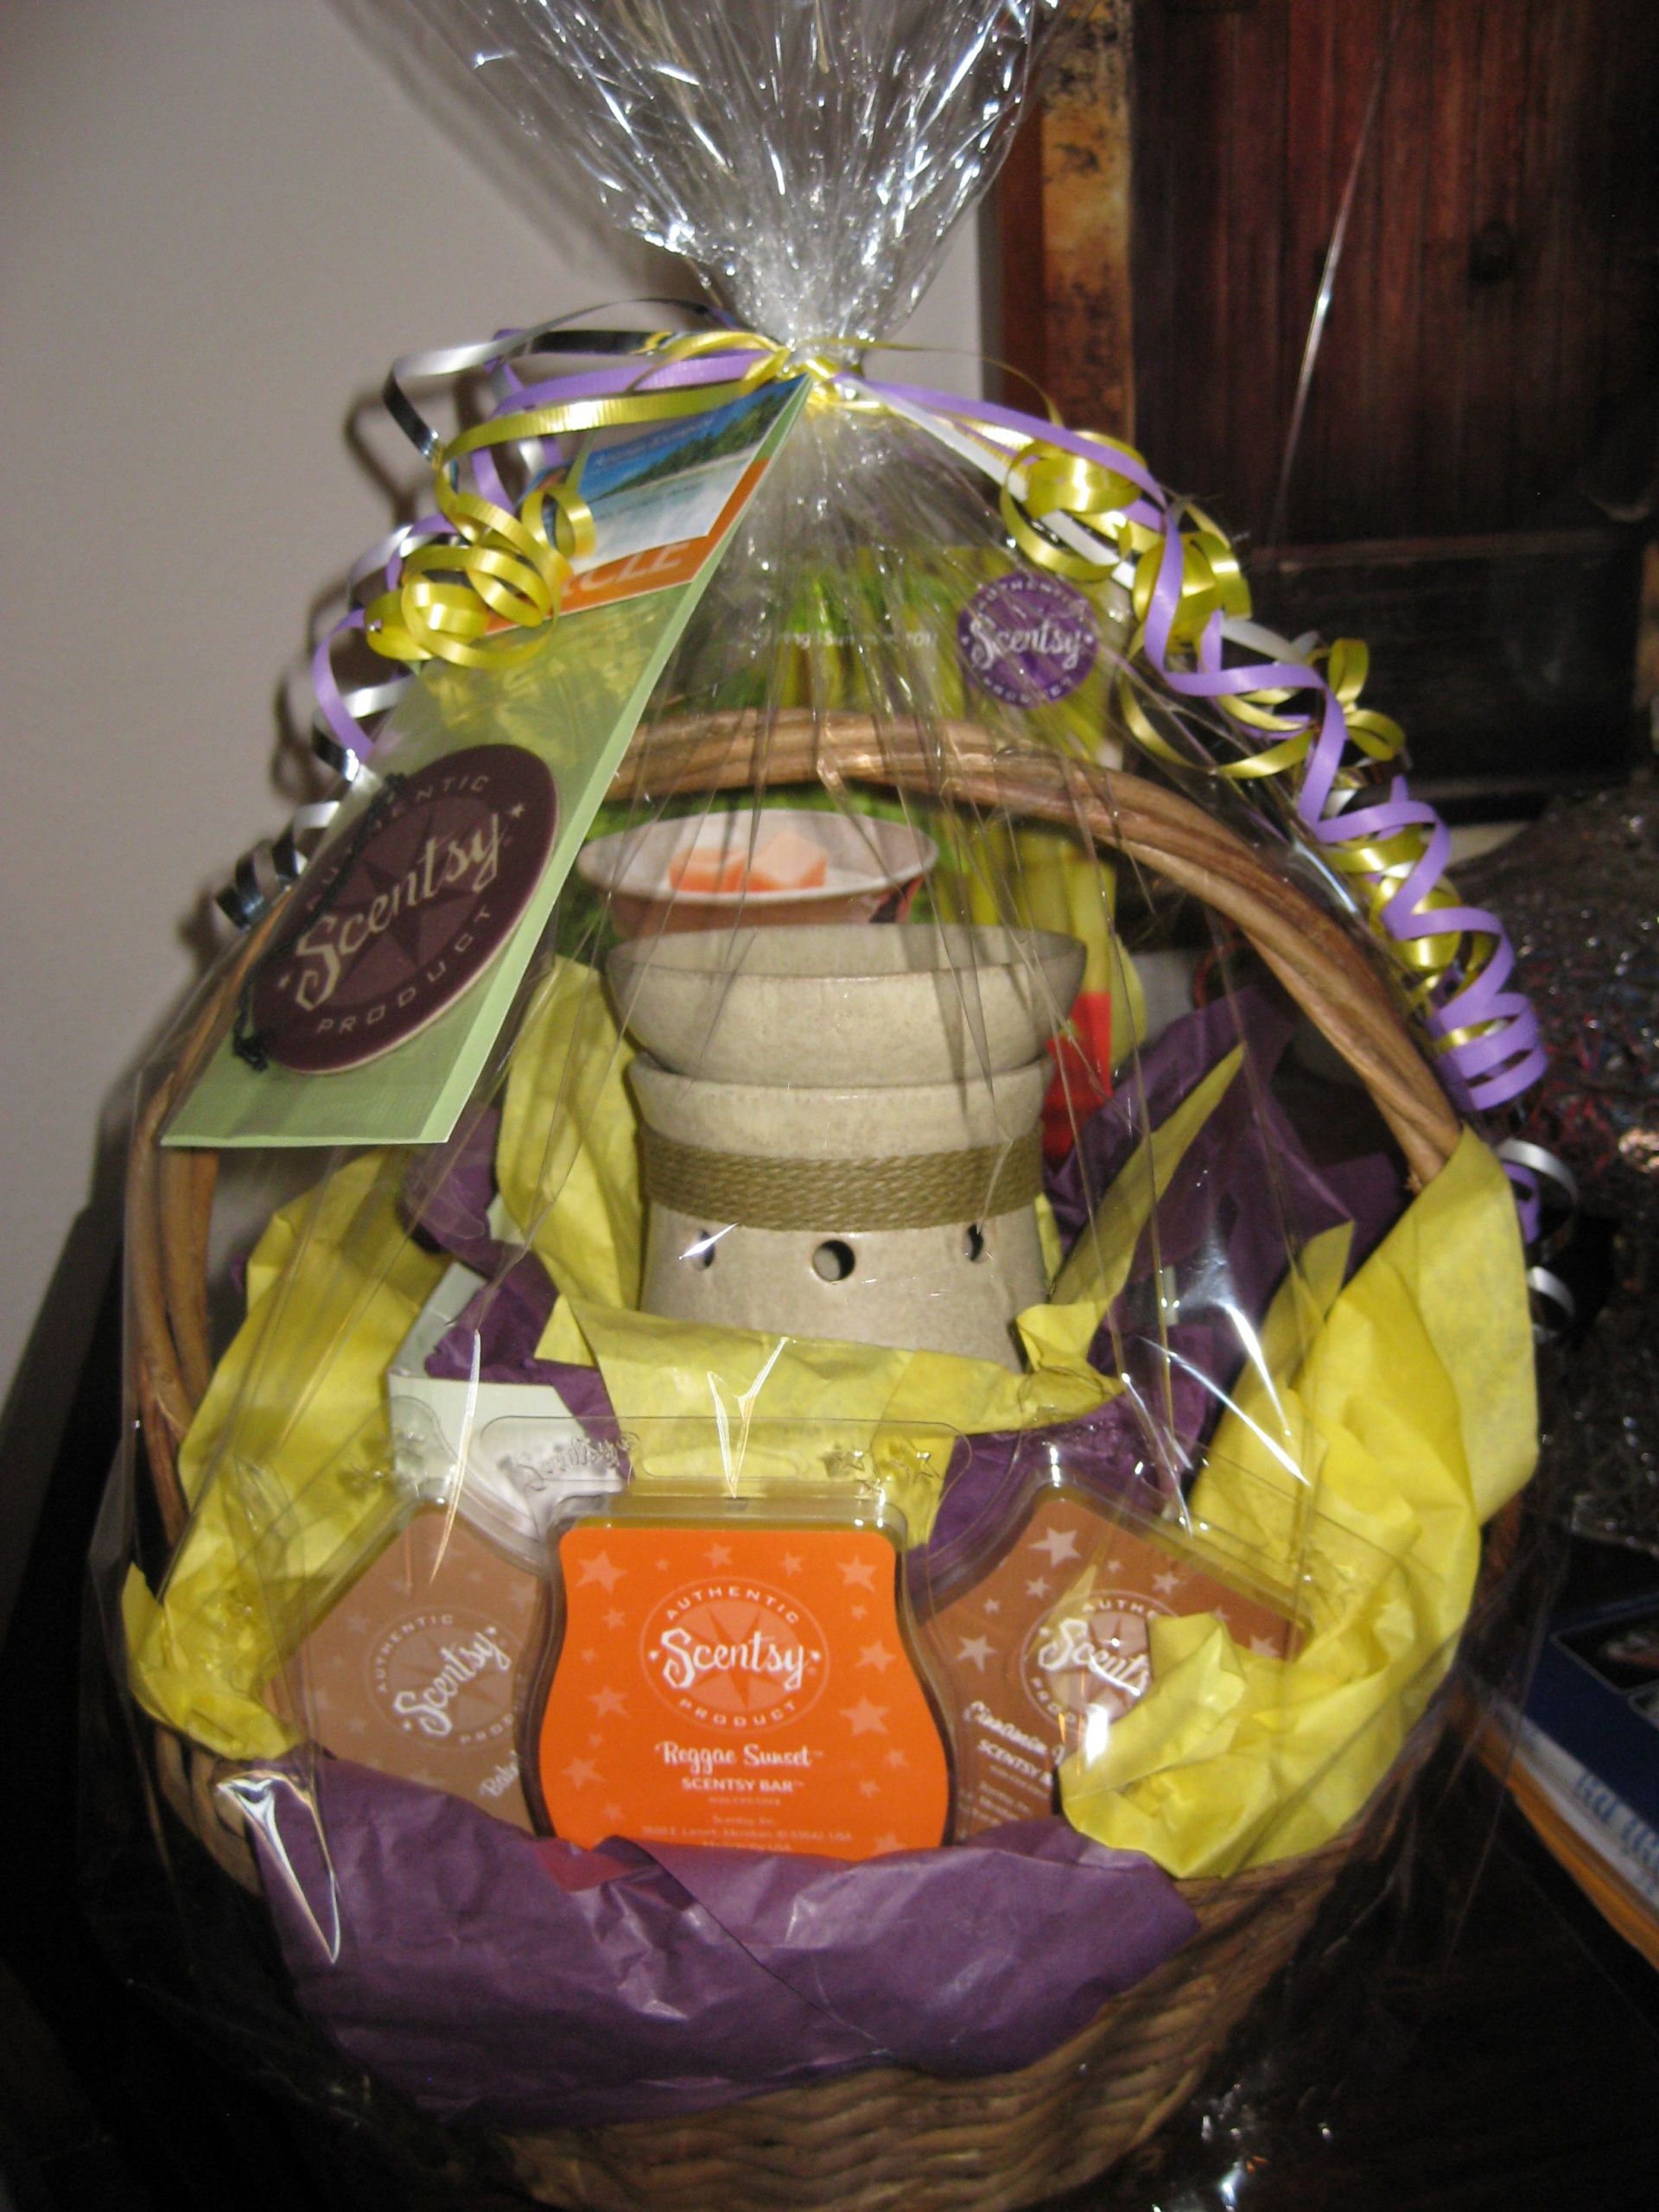 Candle Gift Basket Ideas
 Raffle Basket I personally would include only one bar and